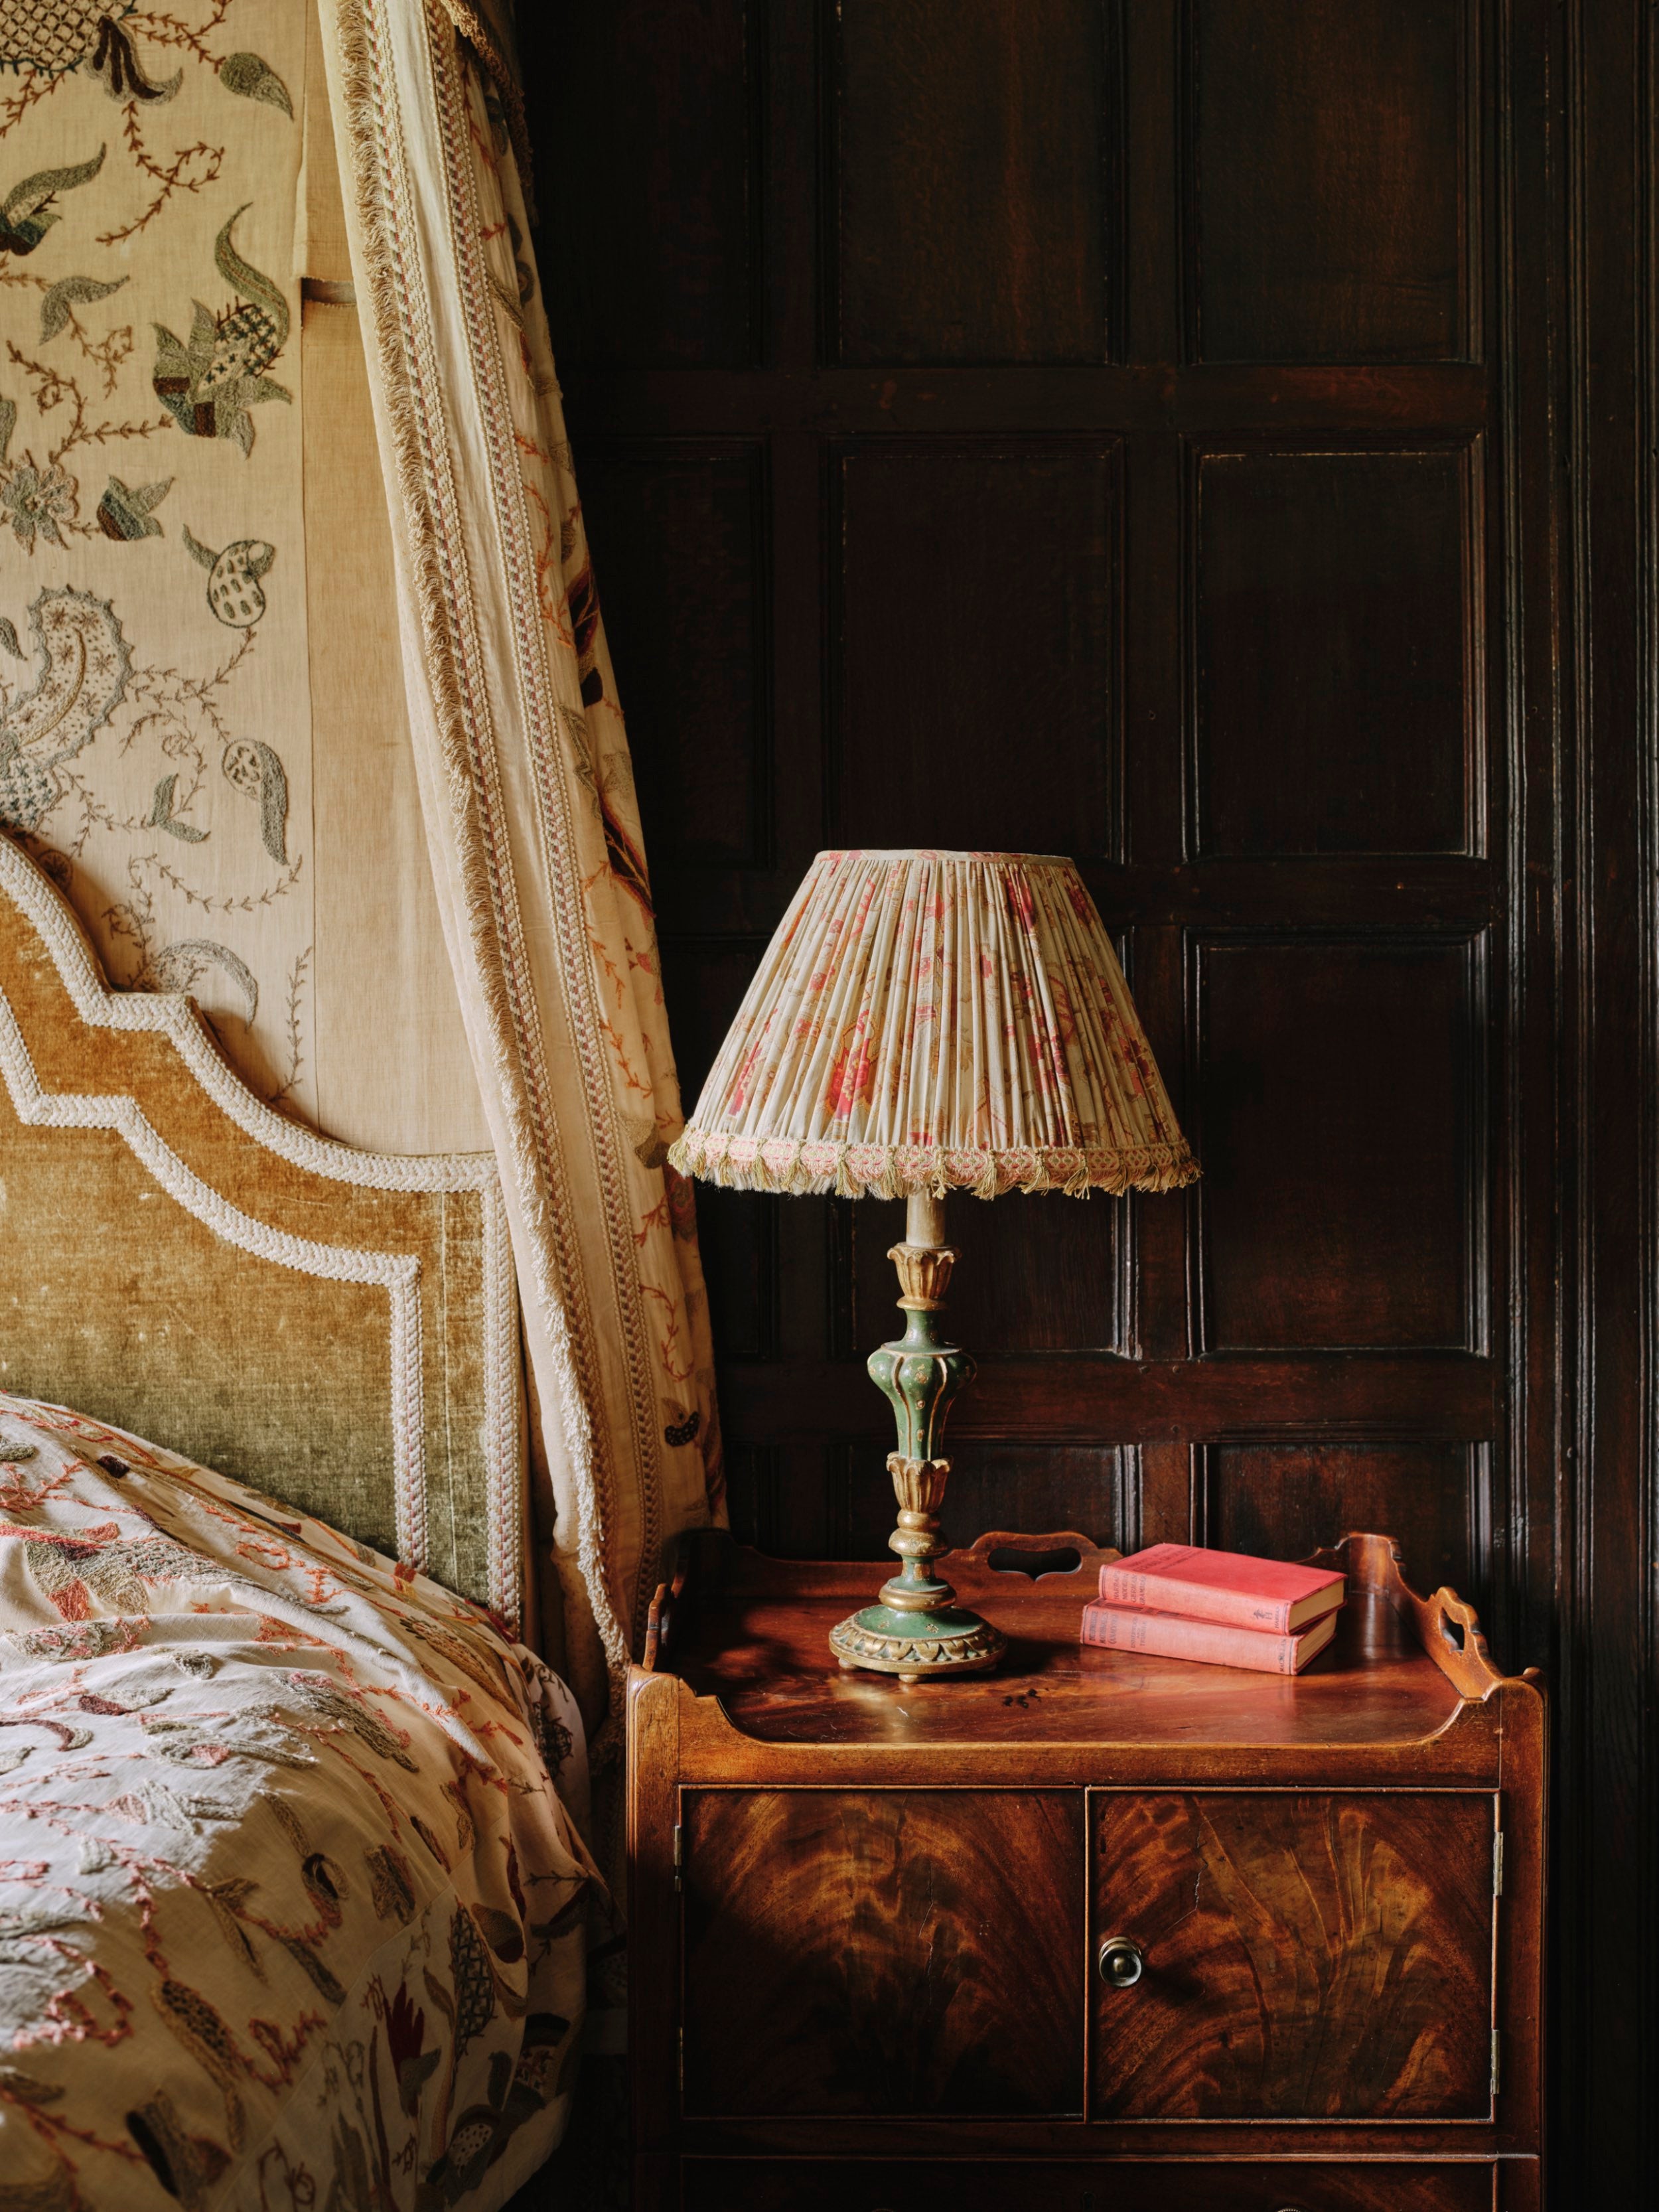 A Gathered Lampshade made from an Antique Screen Printed Cotton Voile with Woven Silk Frill